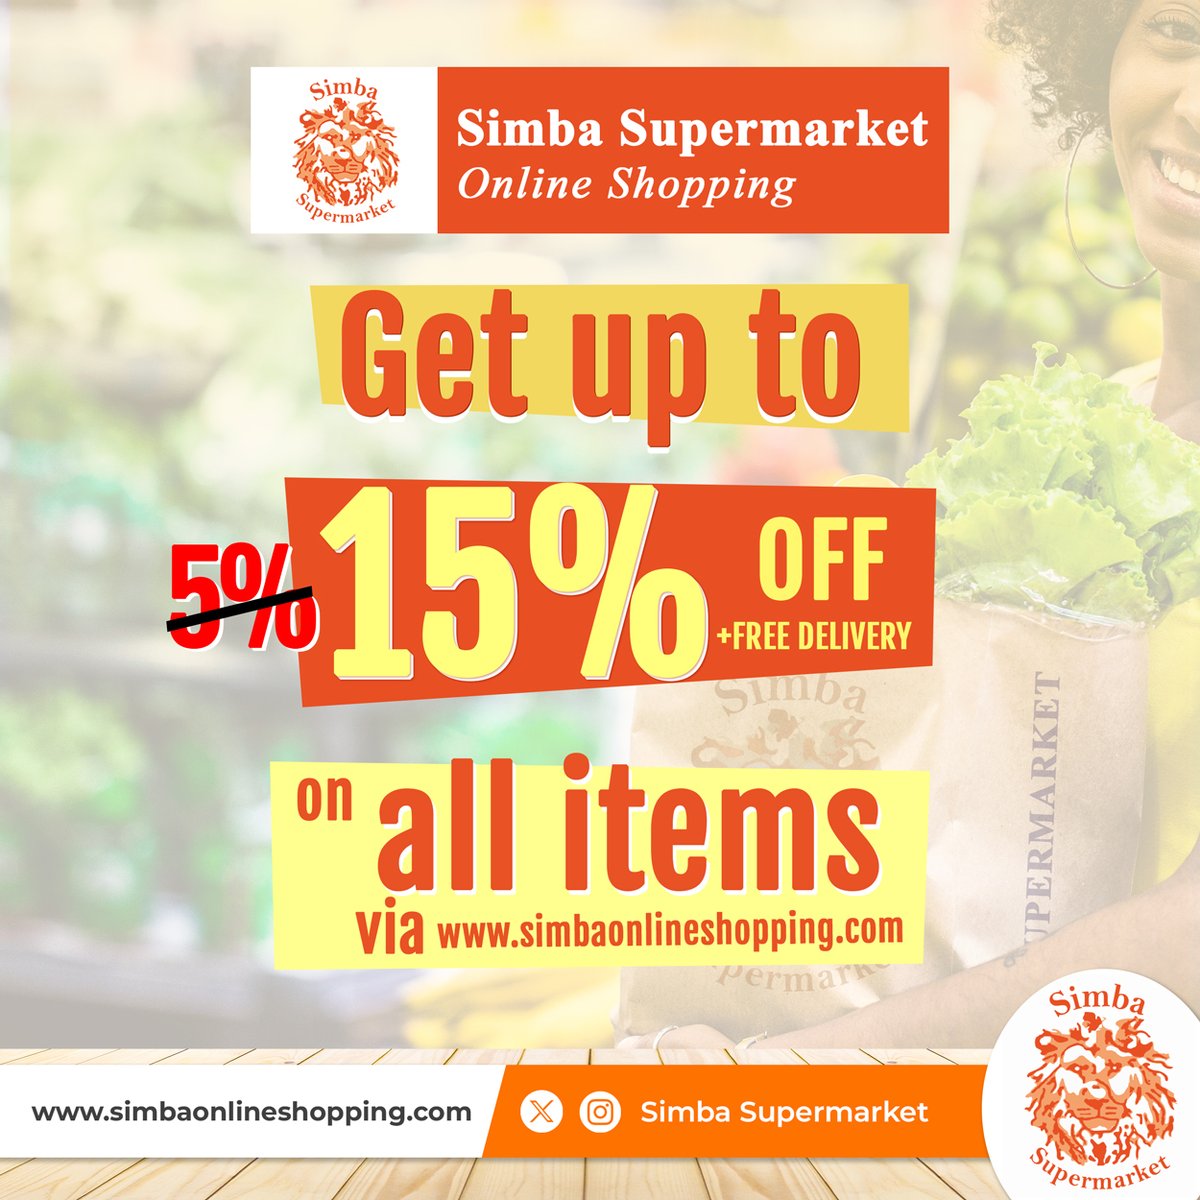 Big News Alert! Our discount just got a major upgrade! Enjoy a whopping 15% off on all items! Shop now and save big! #simbaonlineshopping #RwOT #Rwanda #simbasupermarket #Deals #freedelivery